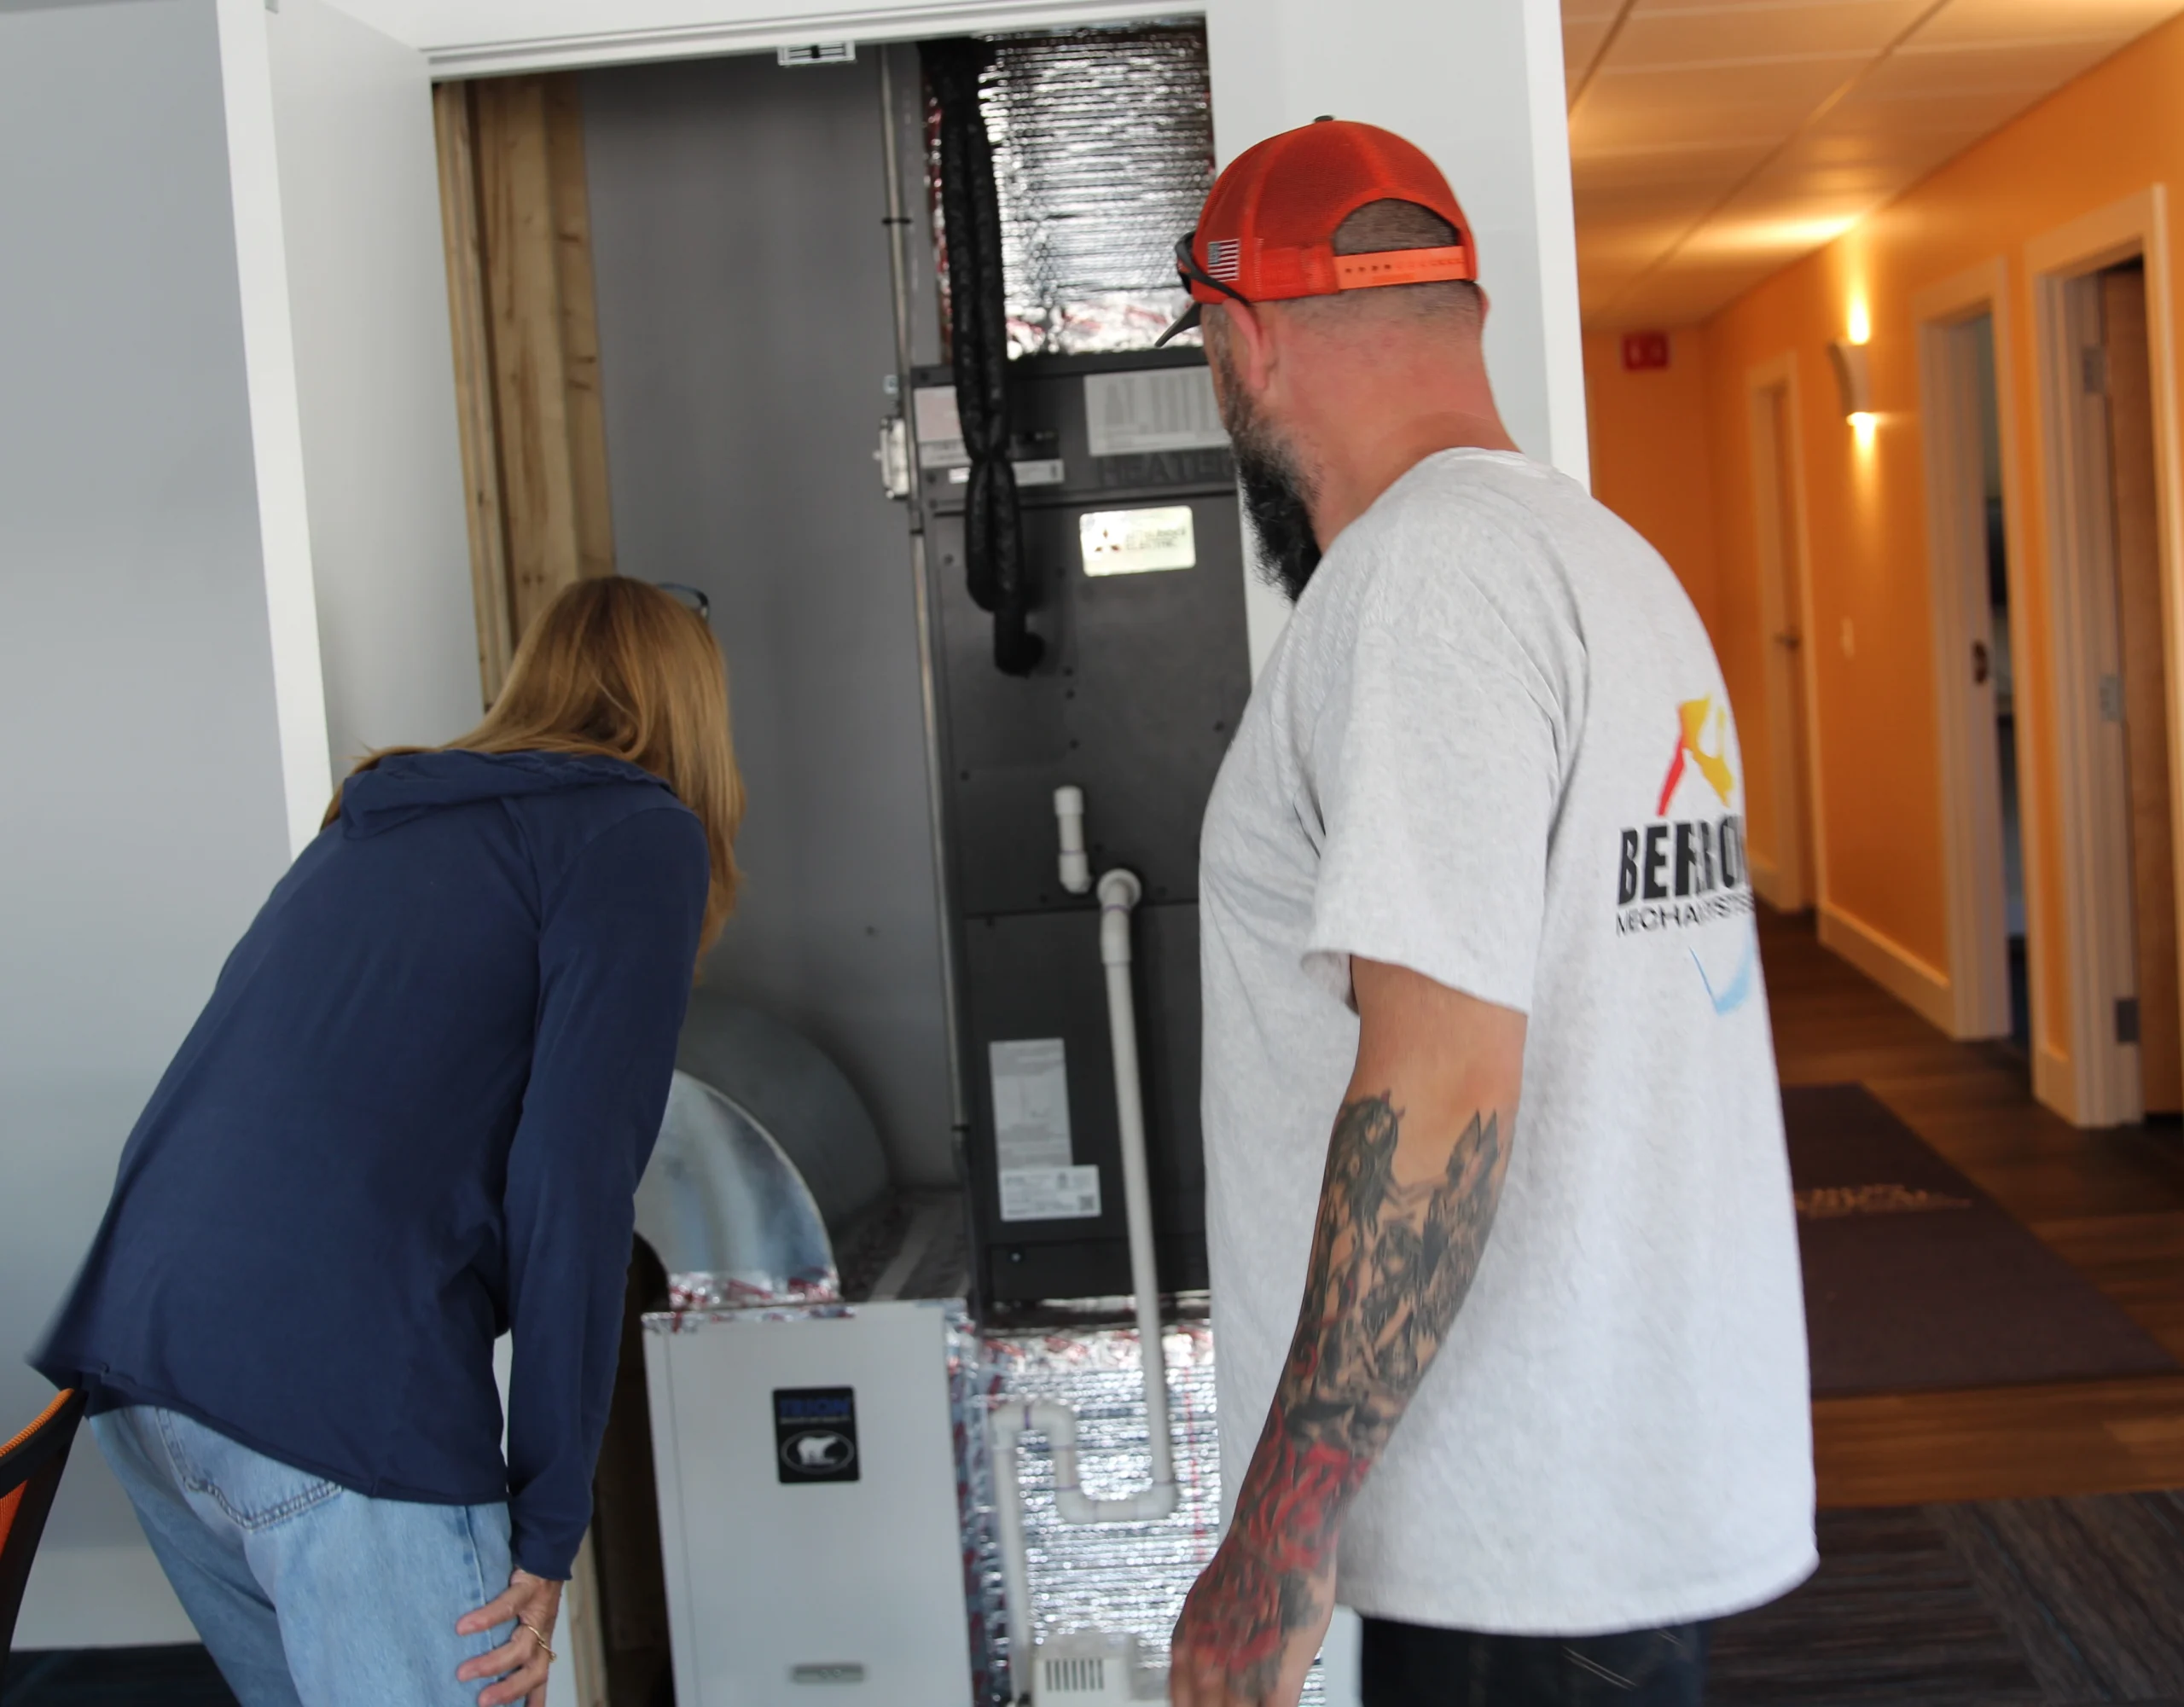 Gas furnace repair & maintenance in Keene, NH with Bergeron Mechanical Systems.